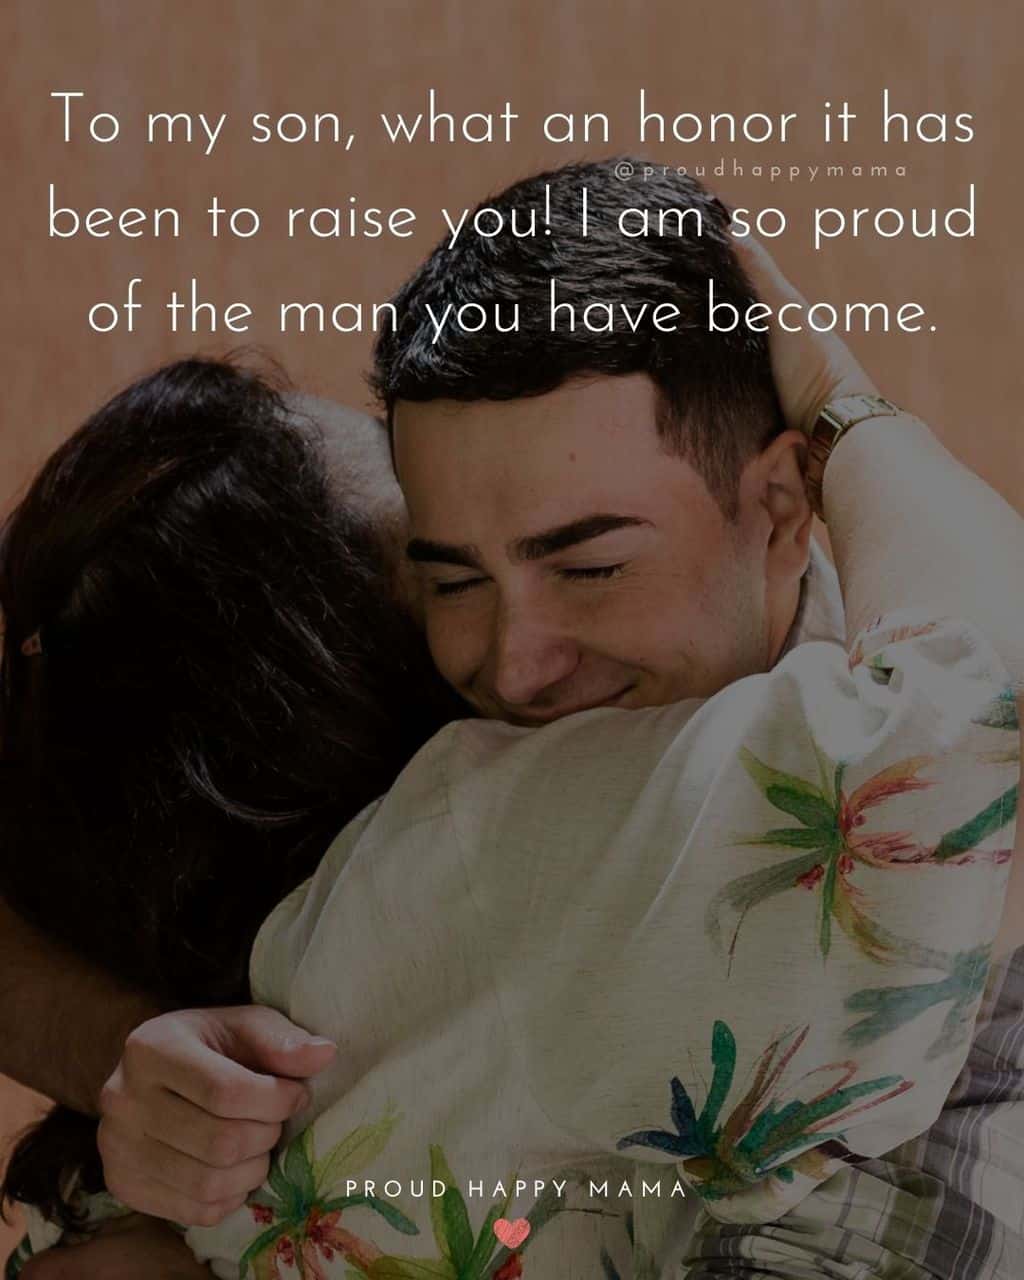 Son Quotes - To my son, what an honor it has been to raise you! I am so proud of the man you have become.’